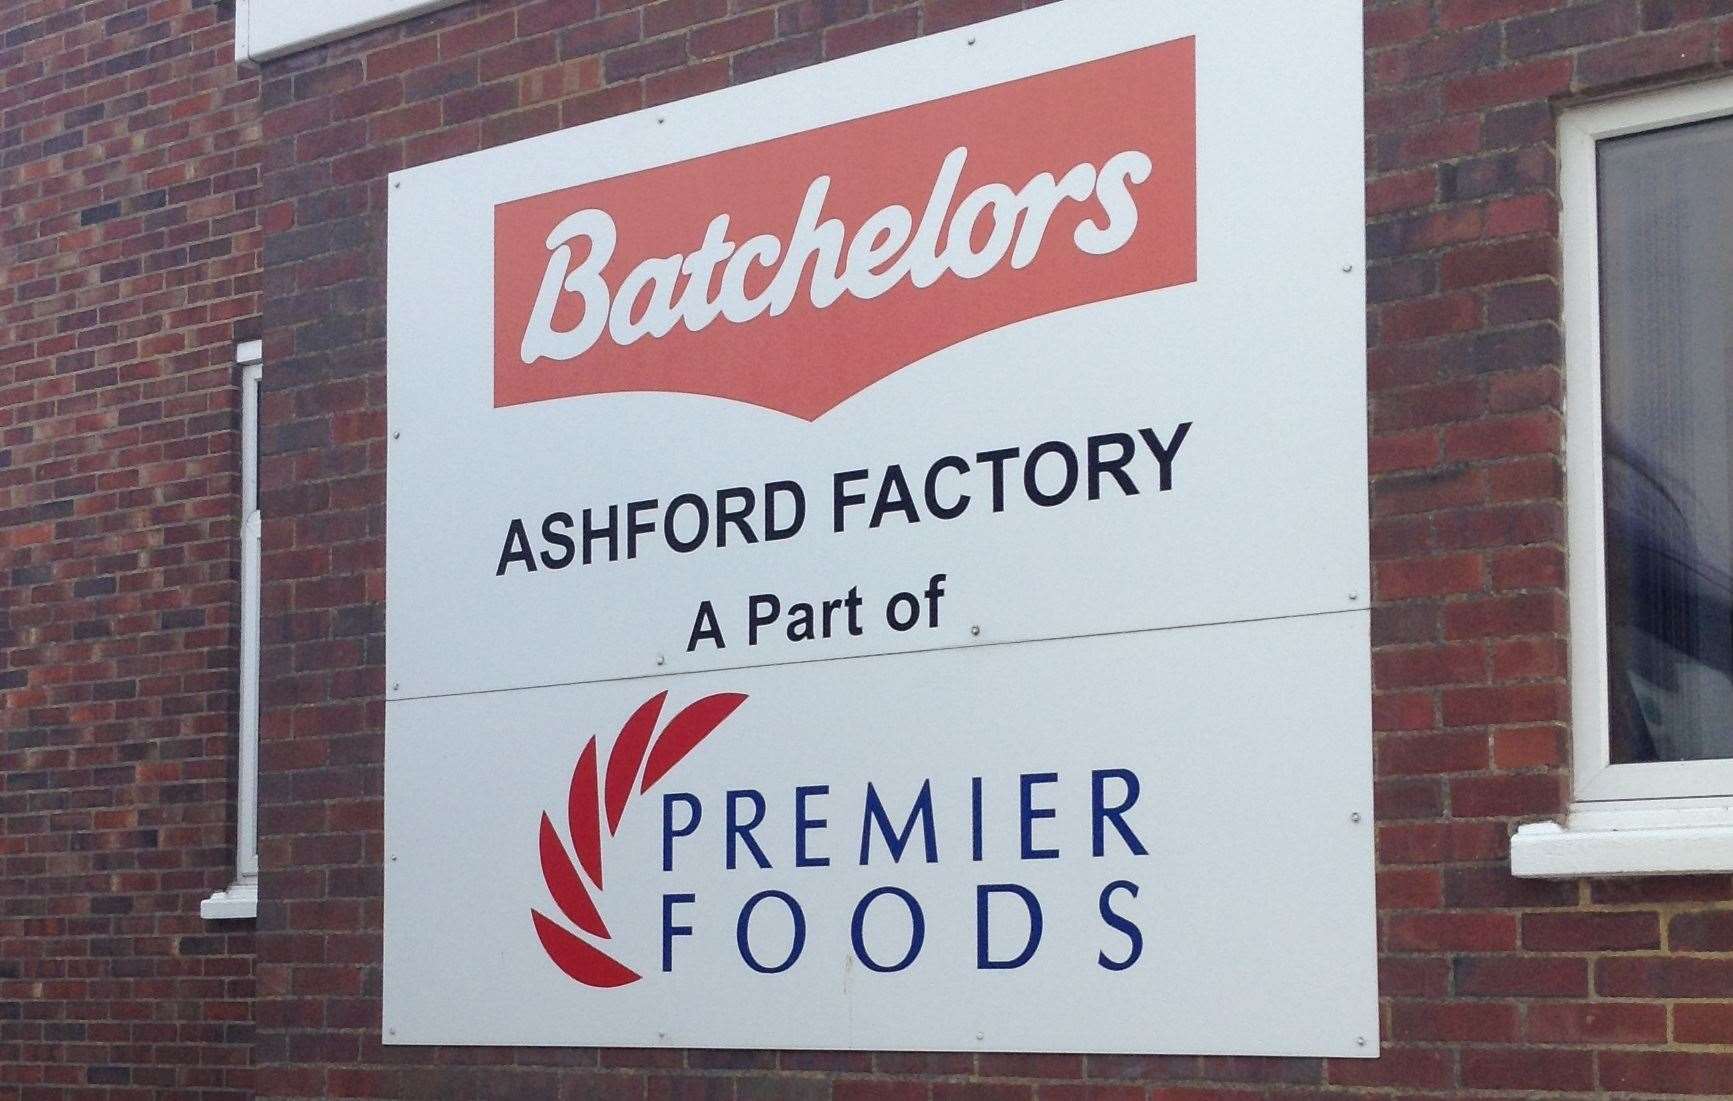 The Batchelors Cup-a-Soup factory in Ashford